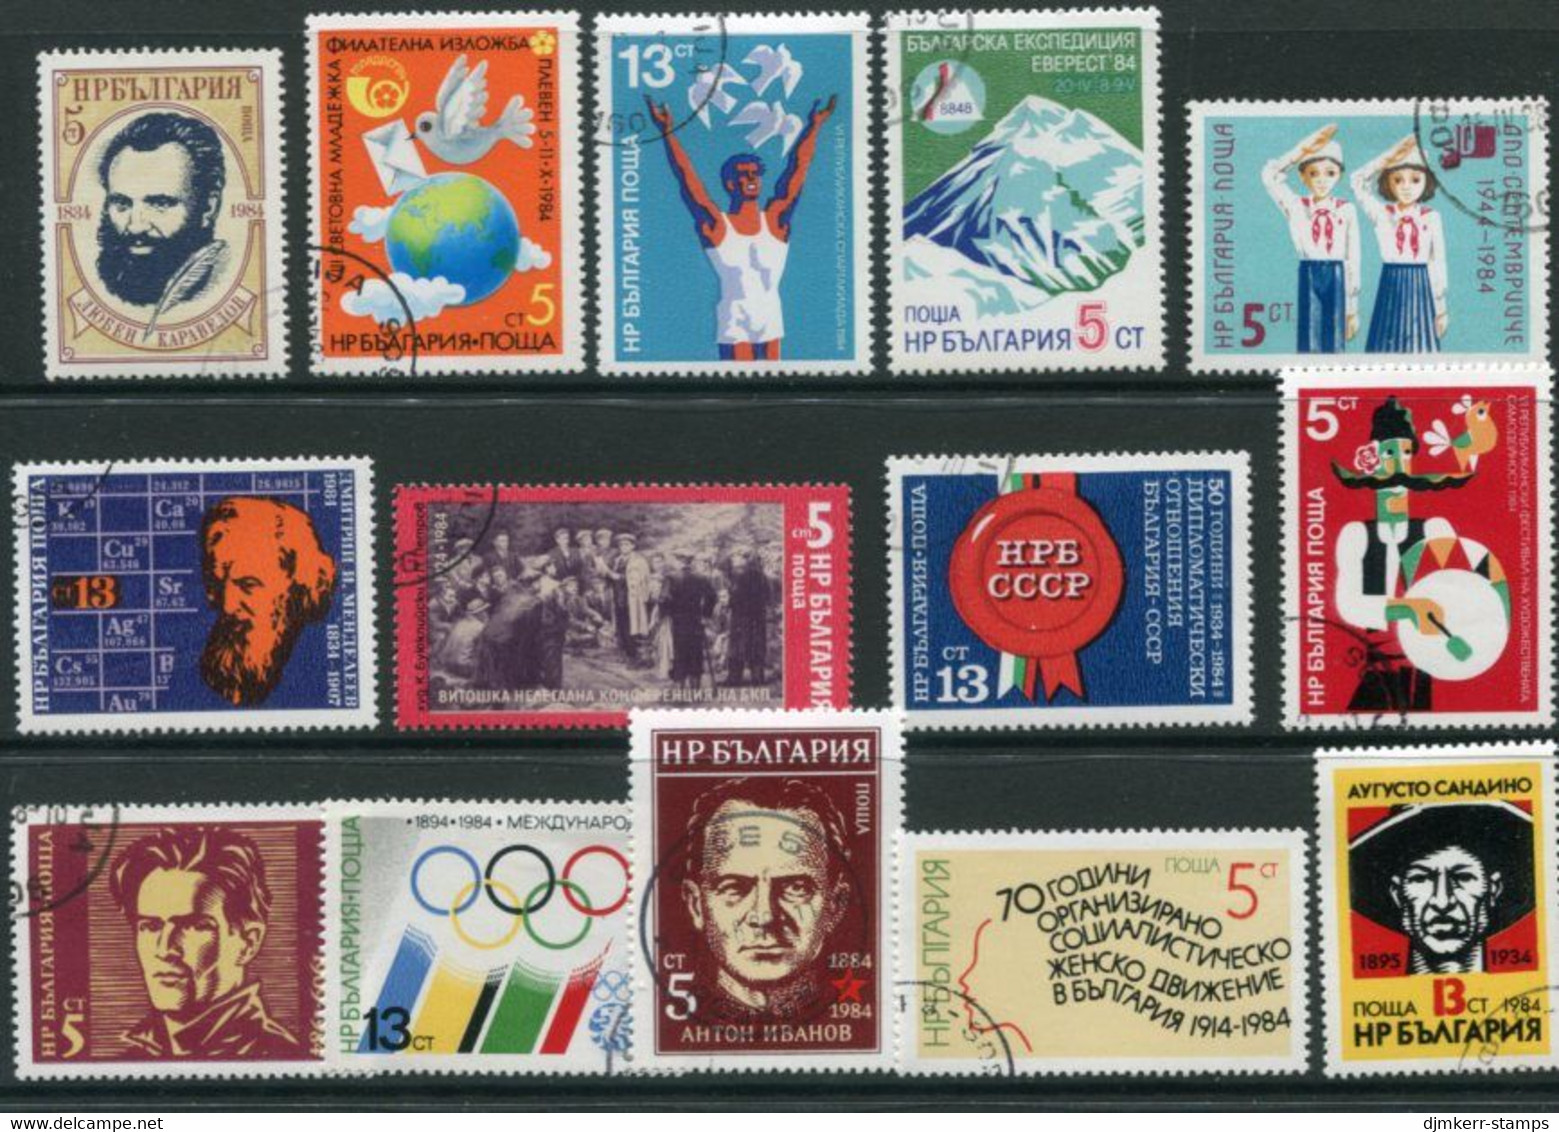 BULGARIA 1984 Fourteen Single Commemorative Issues  Used - Used Stamps